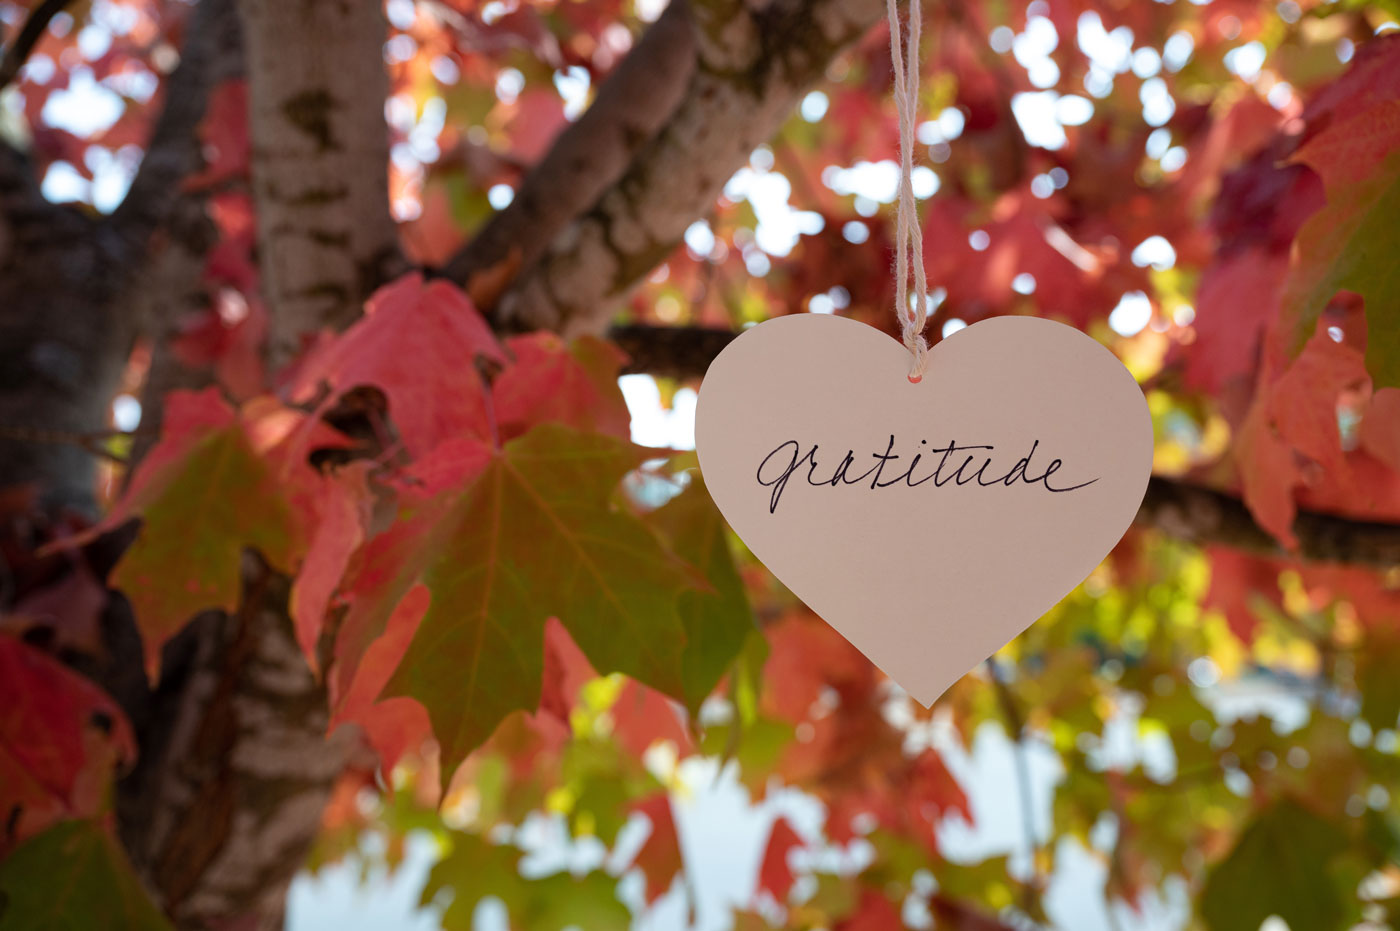 Want to Live More Sustainably? Practice Gratitude